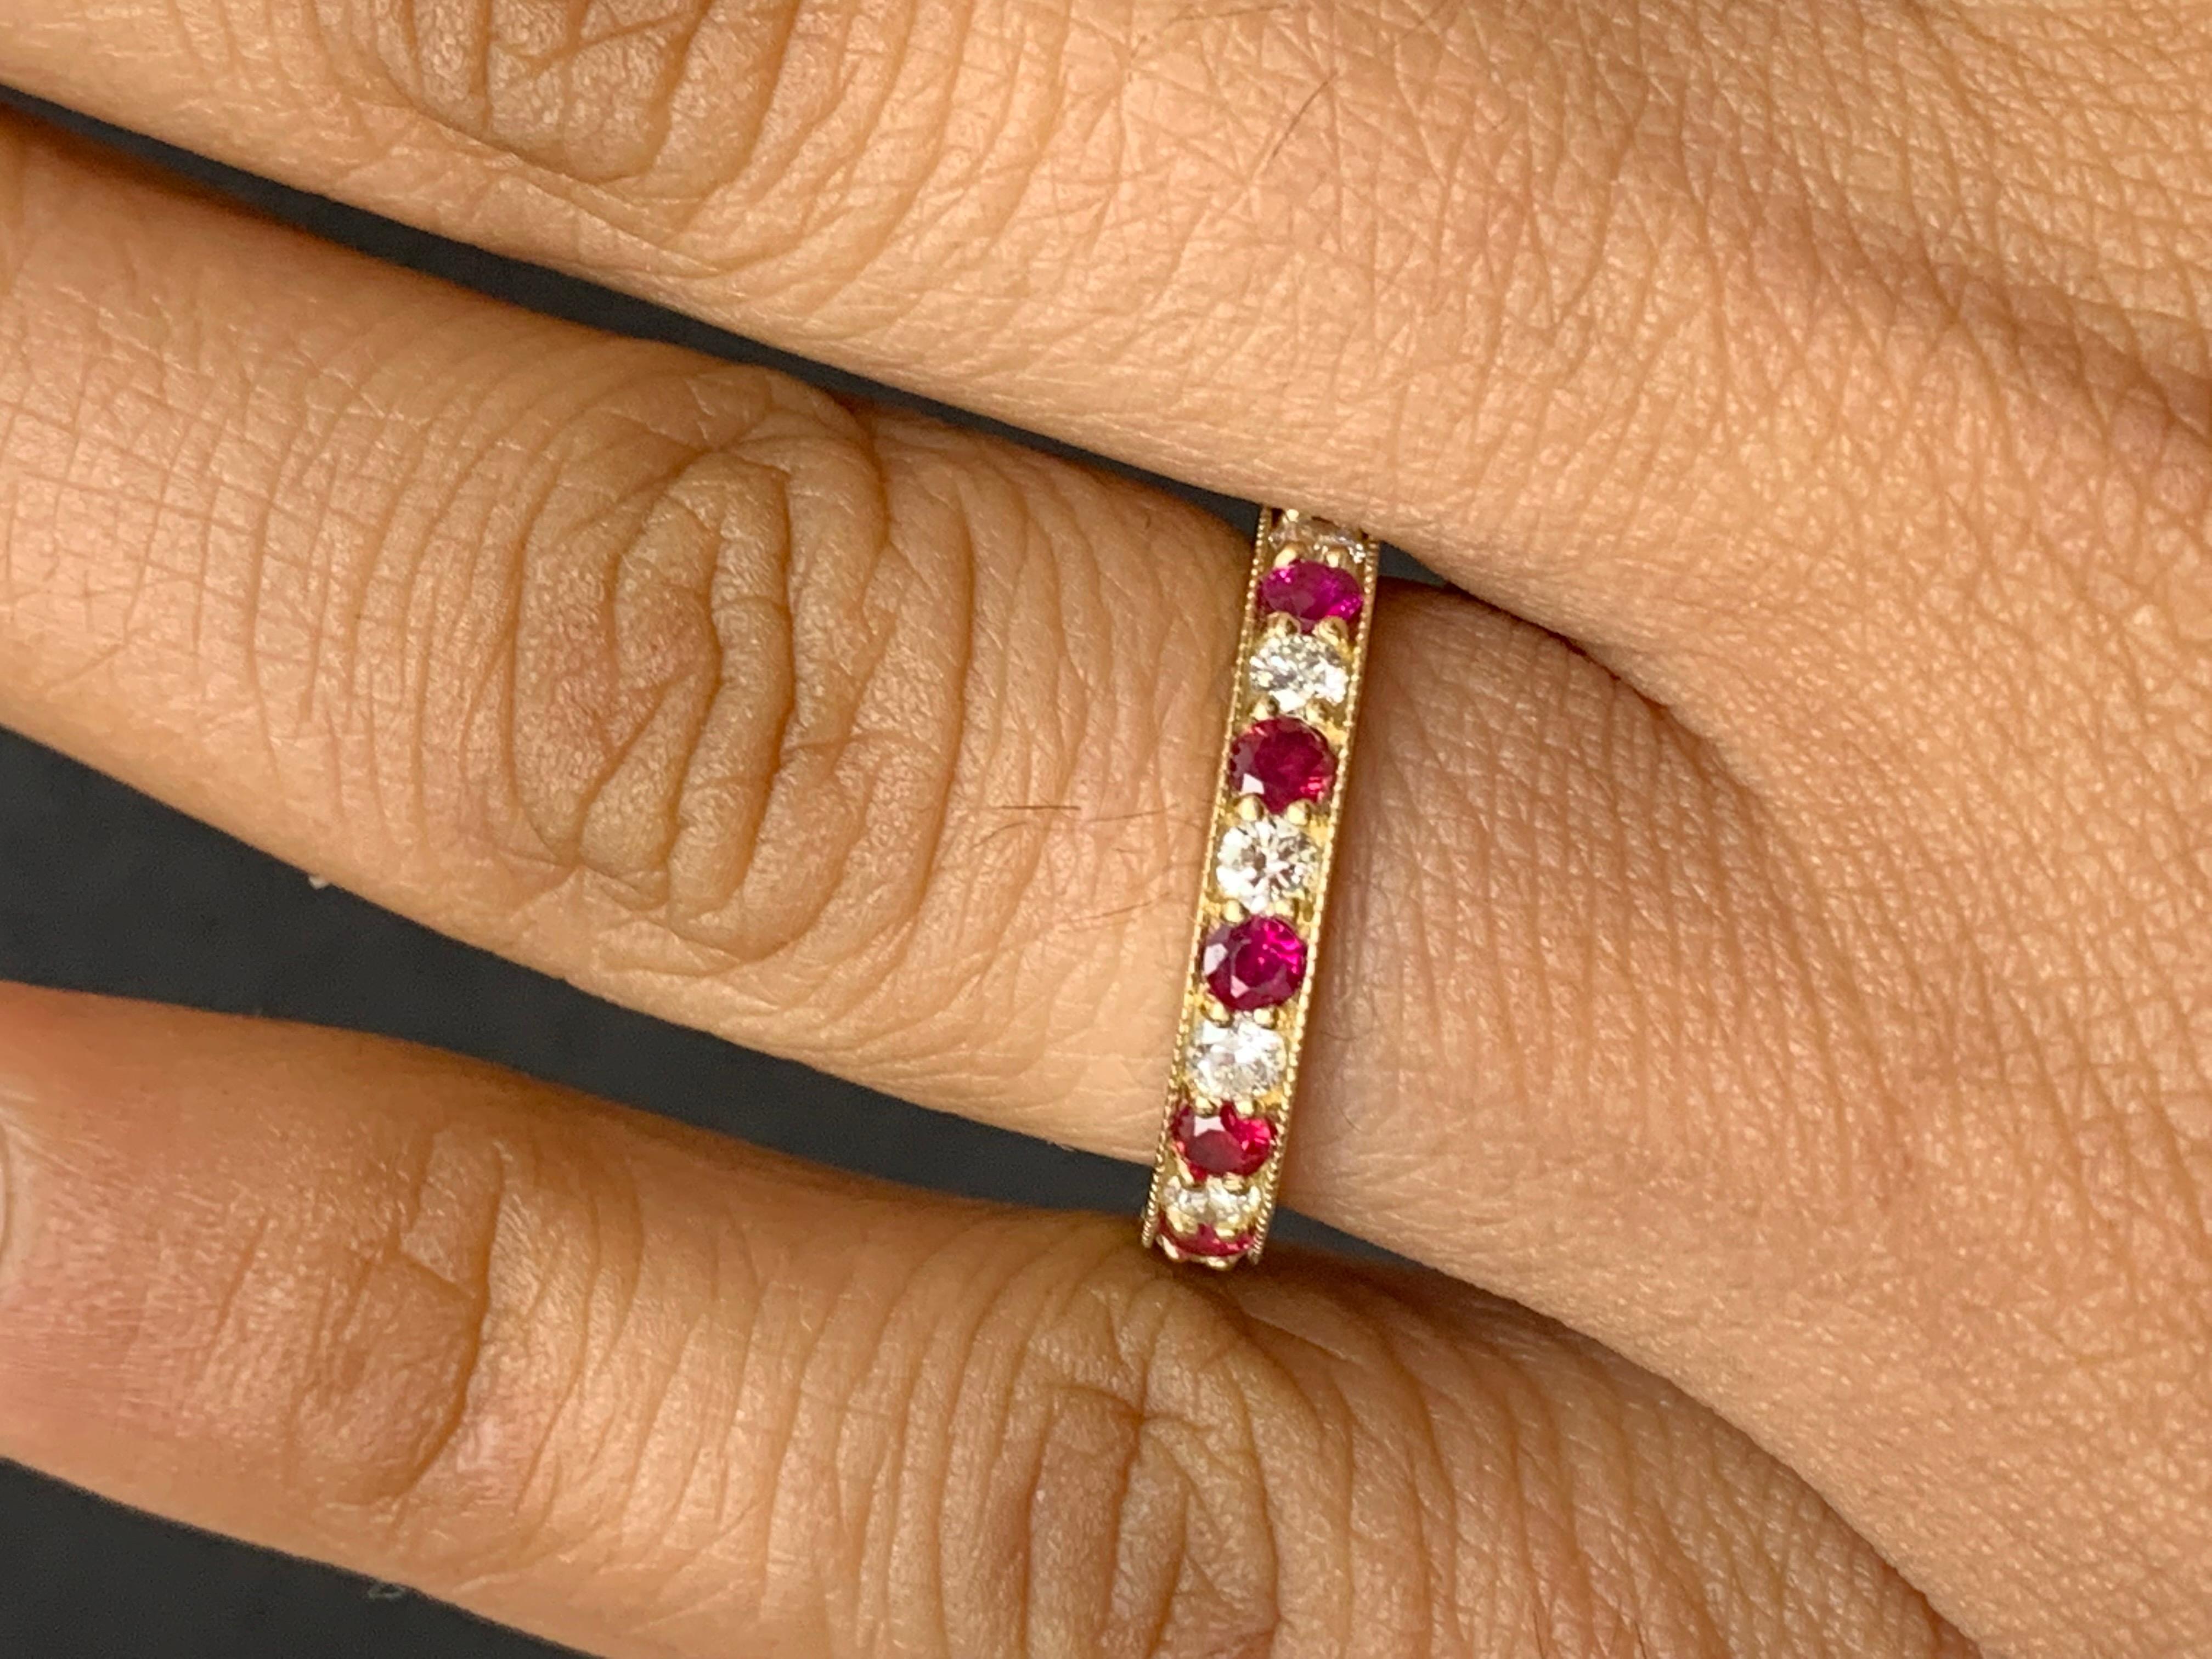 Handcrafted to perfection; showcasing color-rich brilliant-cut rubies that elegantly alternate brilliant-cut diamonds in a 14k yellow gold setting. 
The 7 Rubies weigh 0.62 carats total and 6 diamonds weigh 0.30 carats total.

Size 6.5 US (Sizable).